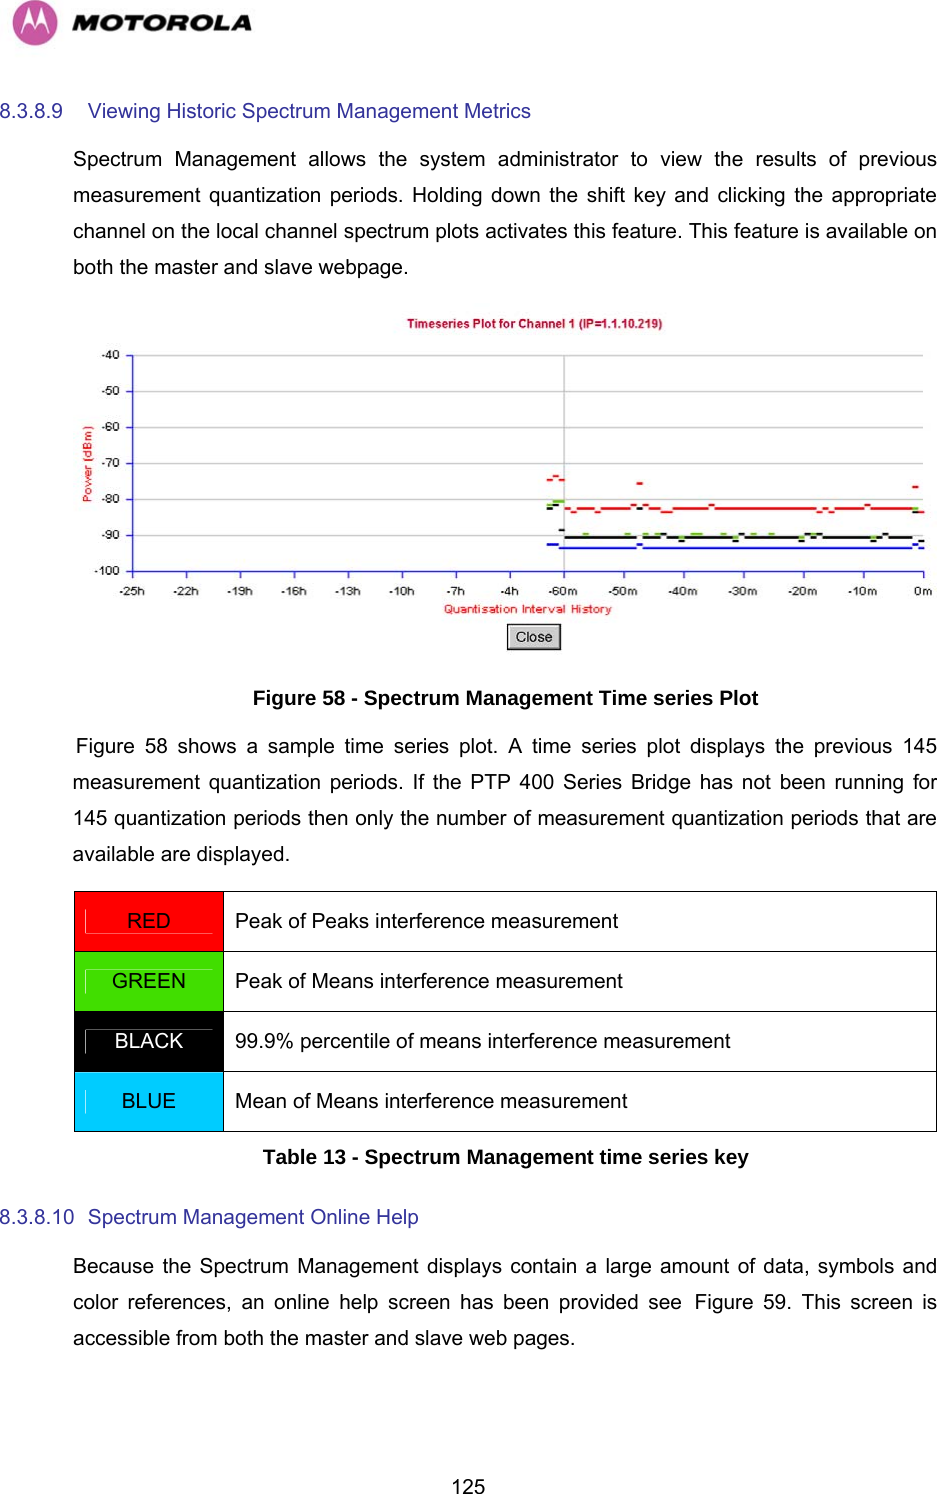   1258.3.8.9  Viewing Historic Spectrum Management Metrics  Spectrum Management allows the system administrator to view the results of previous measurement quantization periods. Holding down the shift key and clicking the appropriate channel on the local channel spectrum plots activates this feature. This feature is available on both the master and slave webpage.   Figure 58 - Spectrum Management Time series Plot HFigure 58 shows a sample time series plot. A time series plot displays the previous 145 measurement quantization periods. If the PTP 400 Series Bridge has not been running for 145 quantization periods then only the number of measurement quantization periods that are available are displayed.  RED  Peak of Peaks interference measurement GREEN  Peak of Means interference measurement BLACK  99.9% percentile of means interference measurement BLUE  Mean of Means interference measurement Table 13 - Spectrum Management time series key 8.3.8.10  Spectrum Management Online Help  Because the Spectrum Management displays contain a large amount of data, symbols and color references, an online help screen has been provided see HFigure 59. This screen is accessible from both the master and slave web pages. 